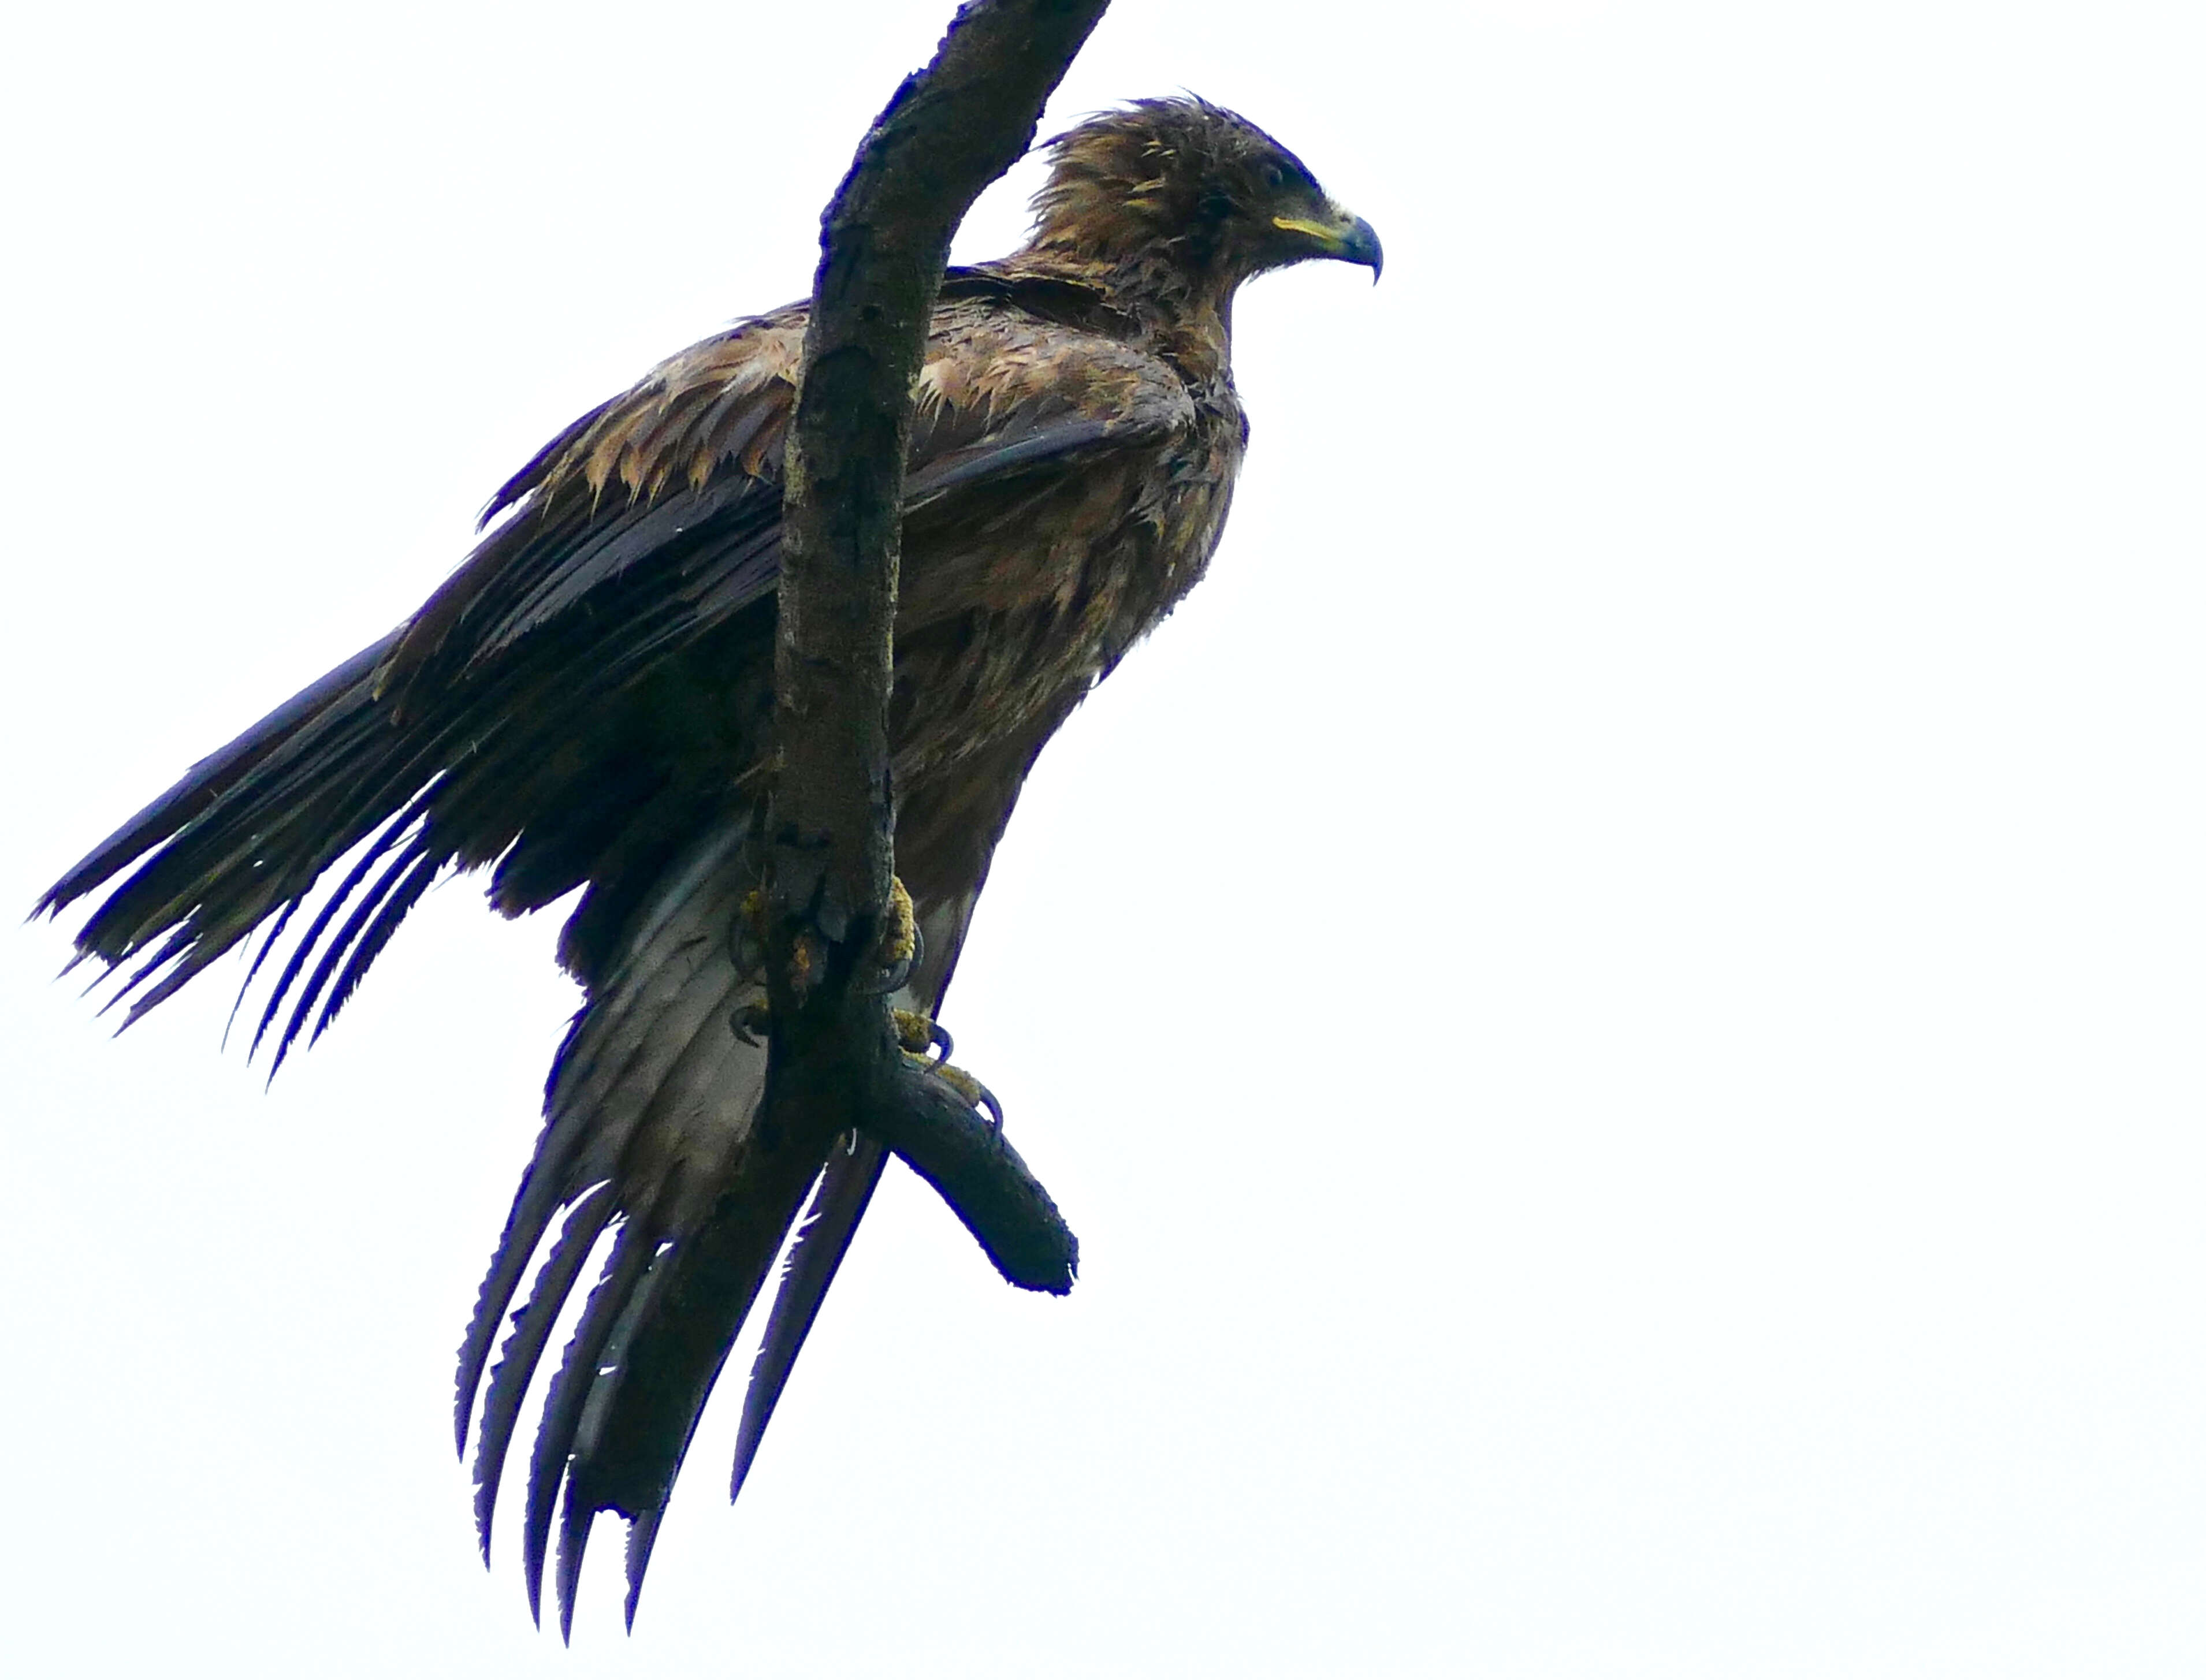 Image of Wahlberg's Eagle